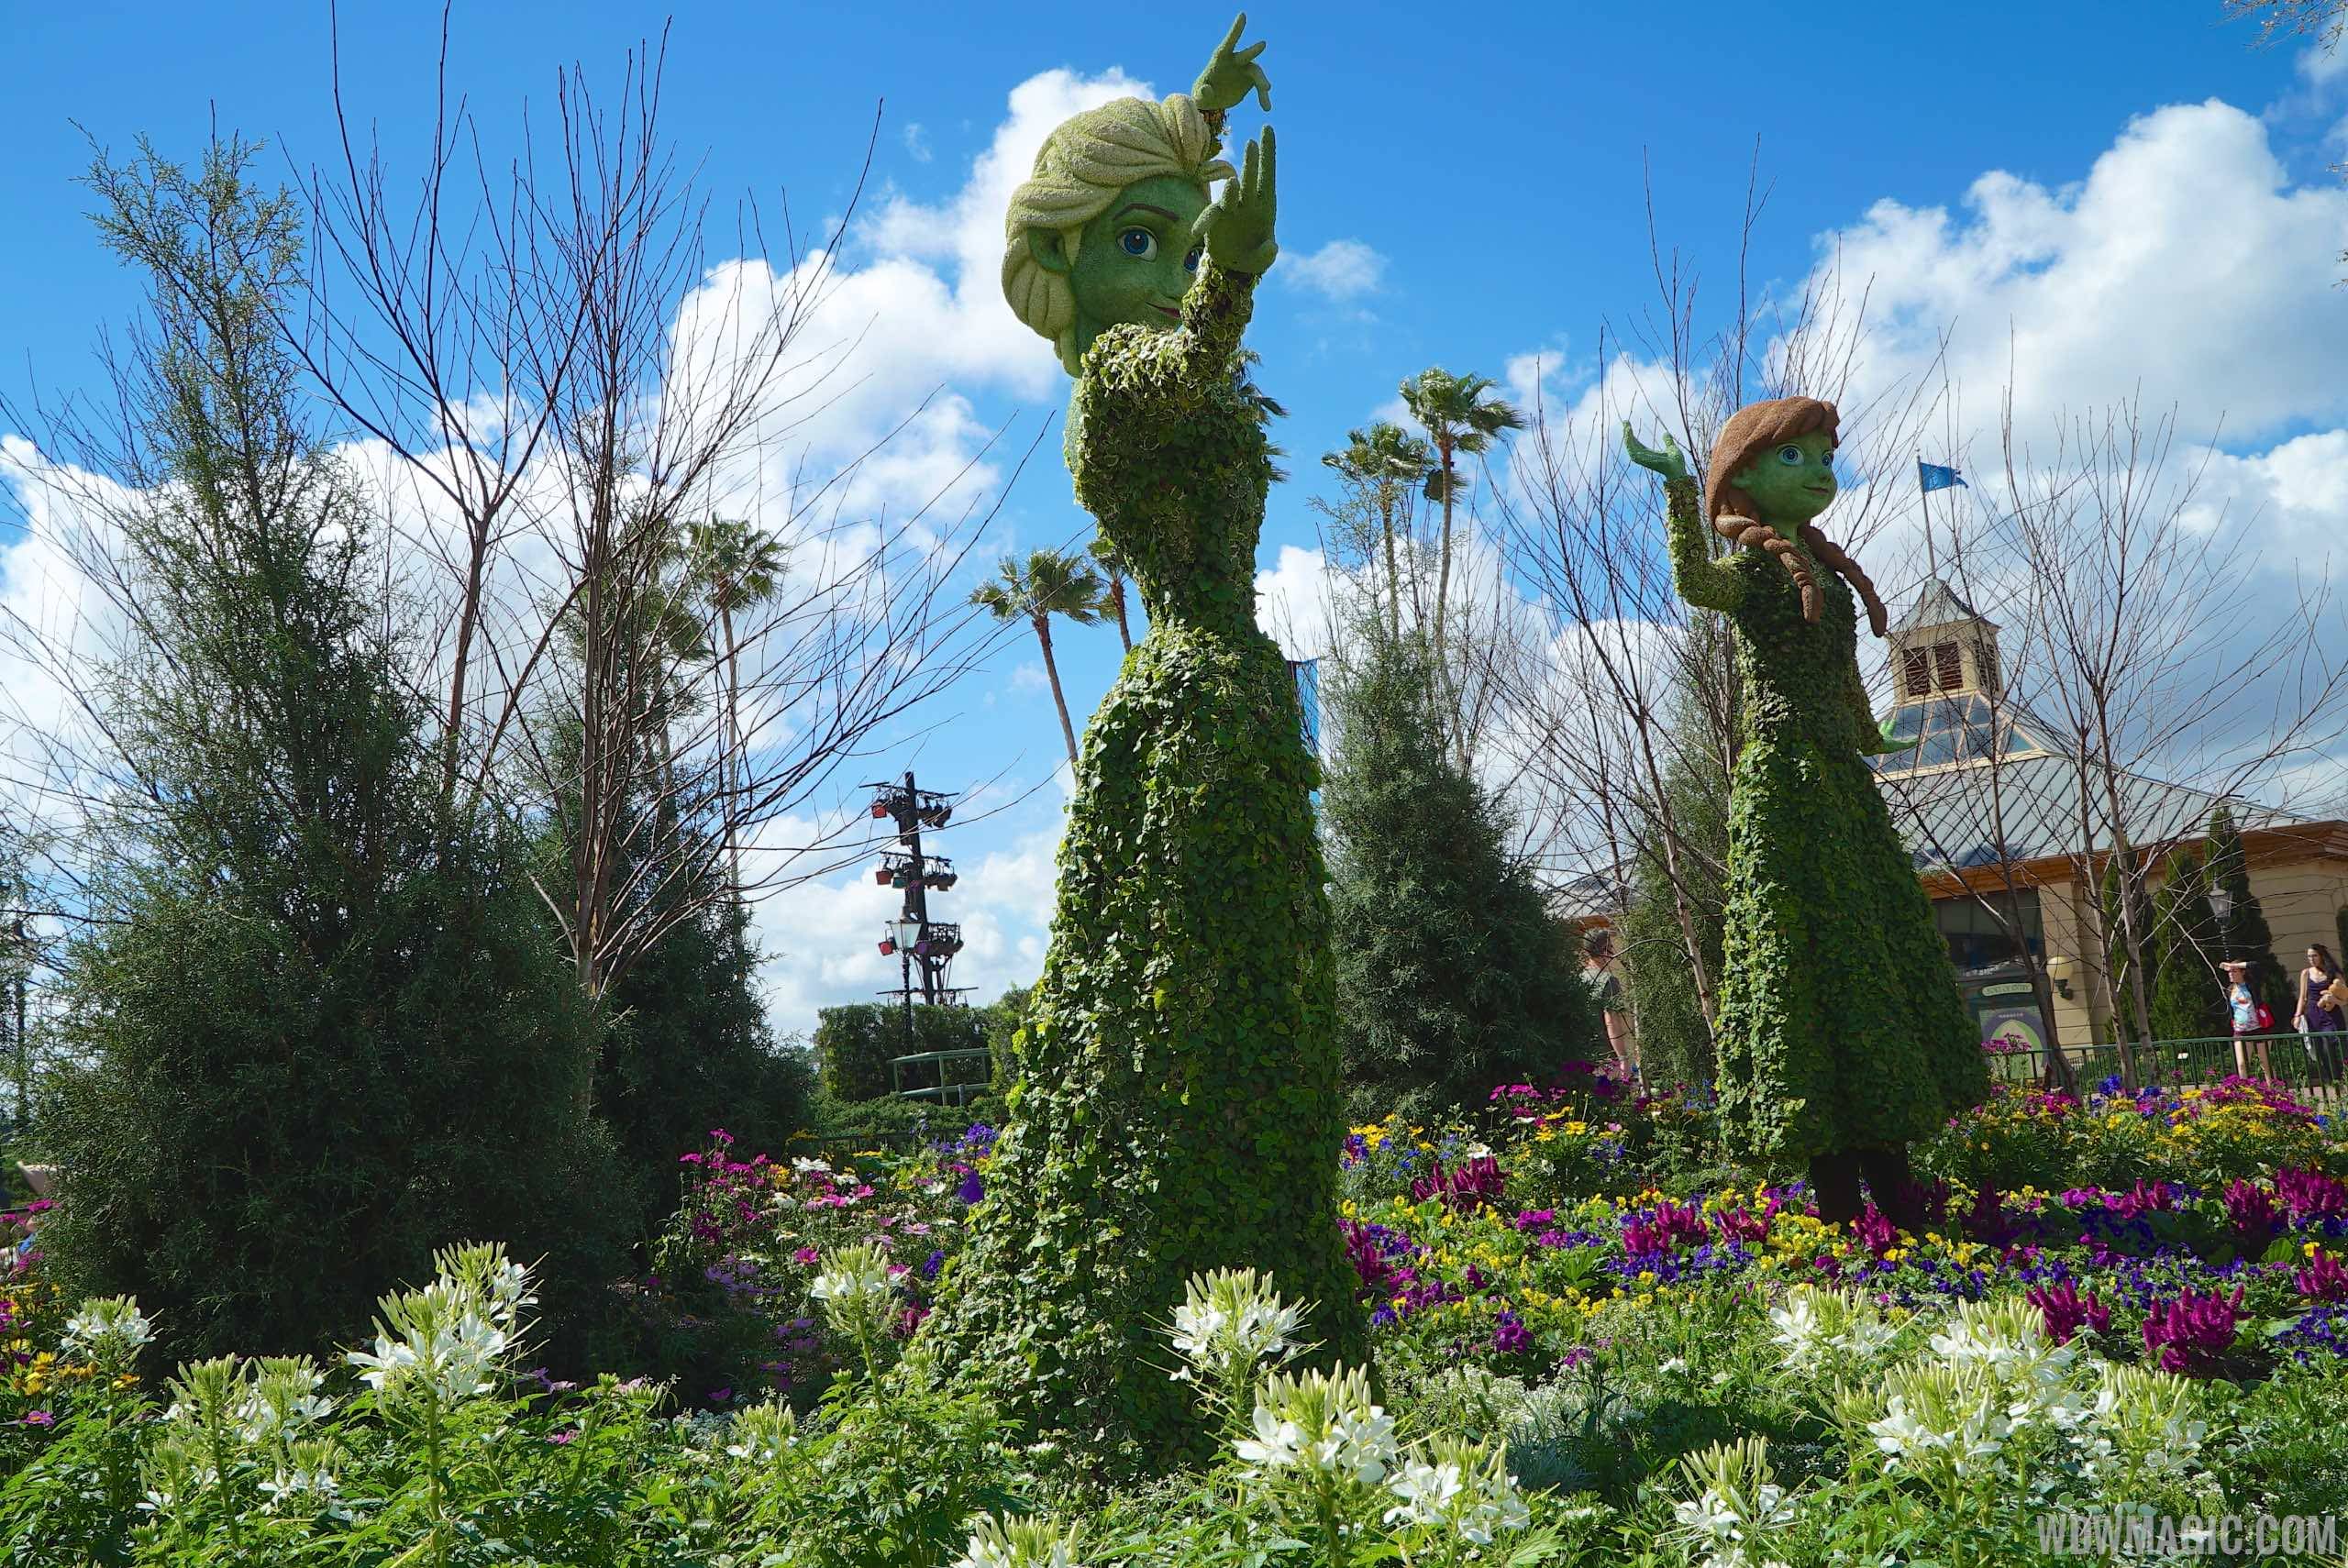 2015 Epcot Flower and Garden Festival - Frozen topiary